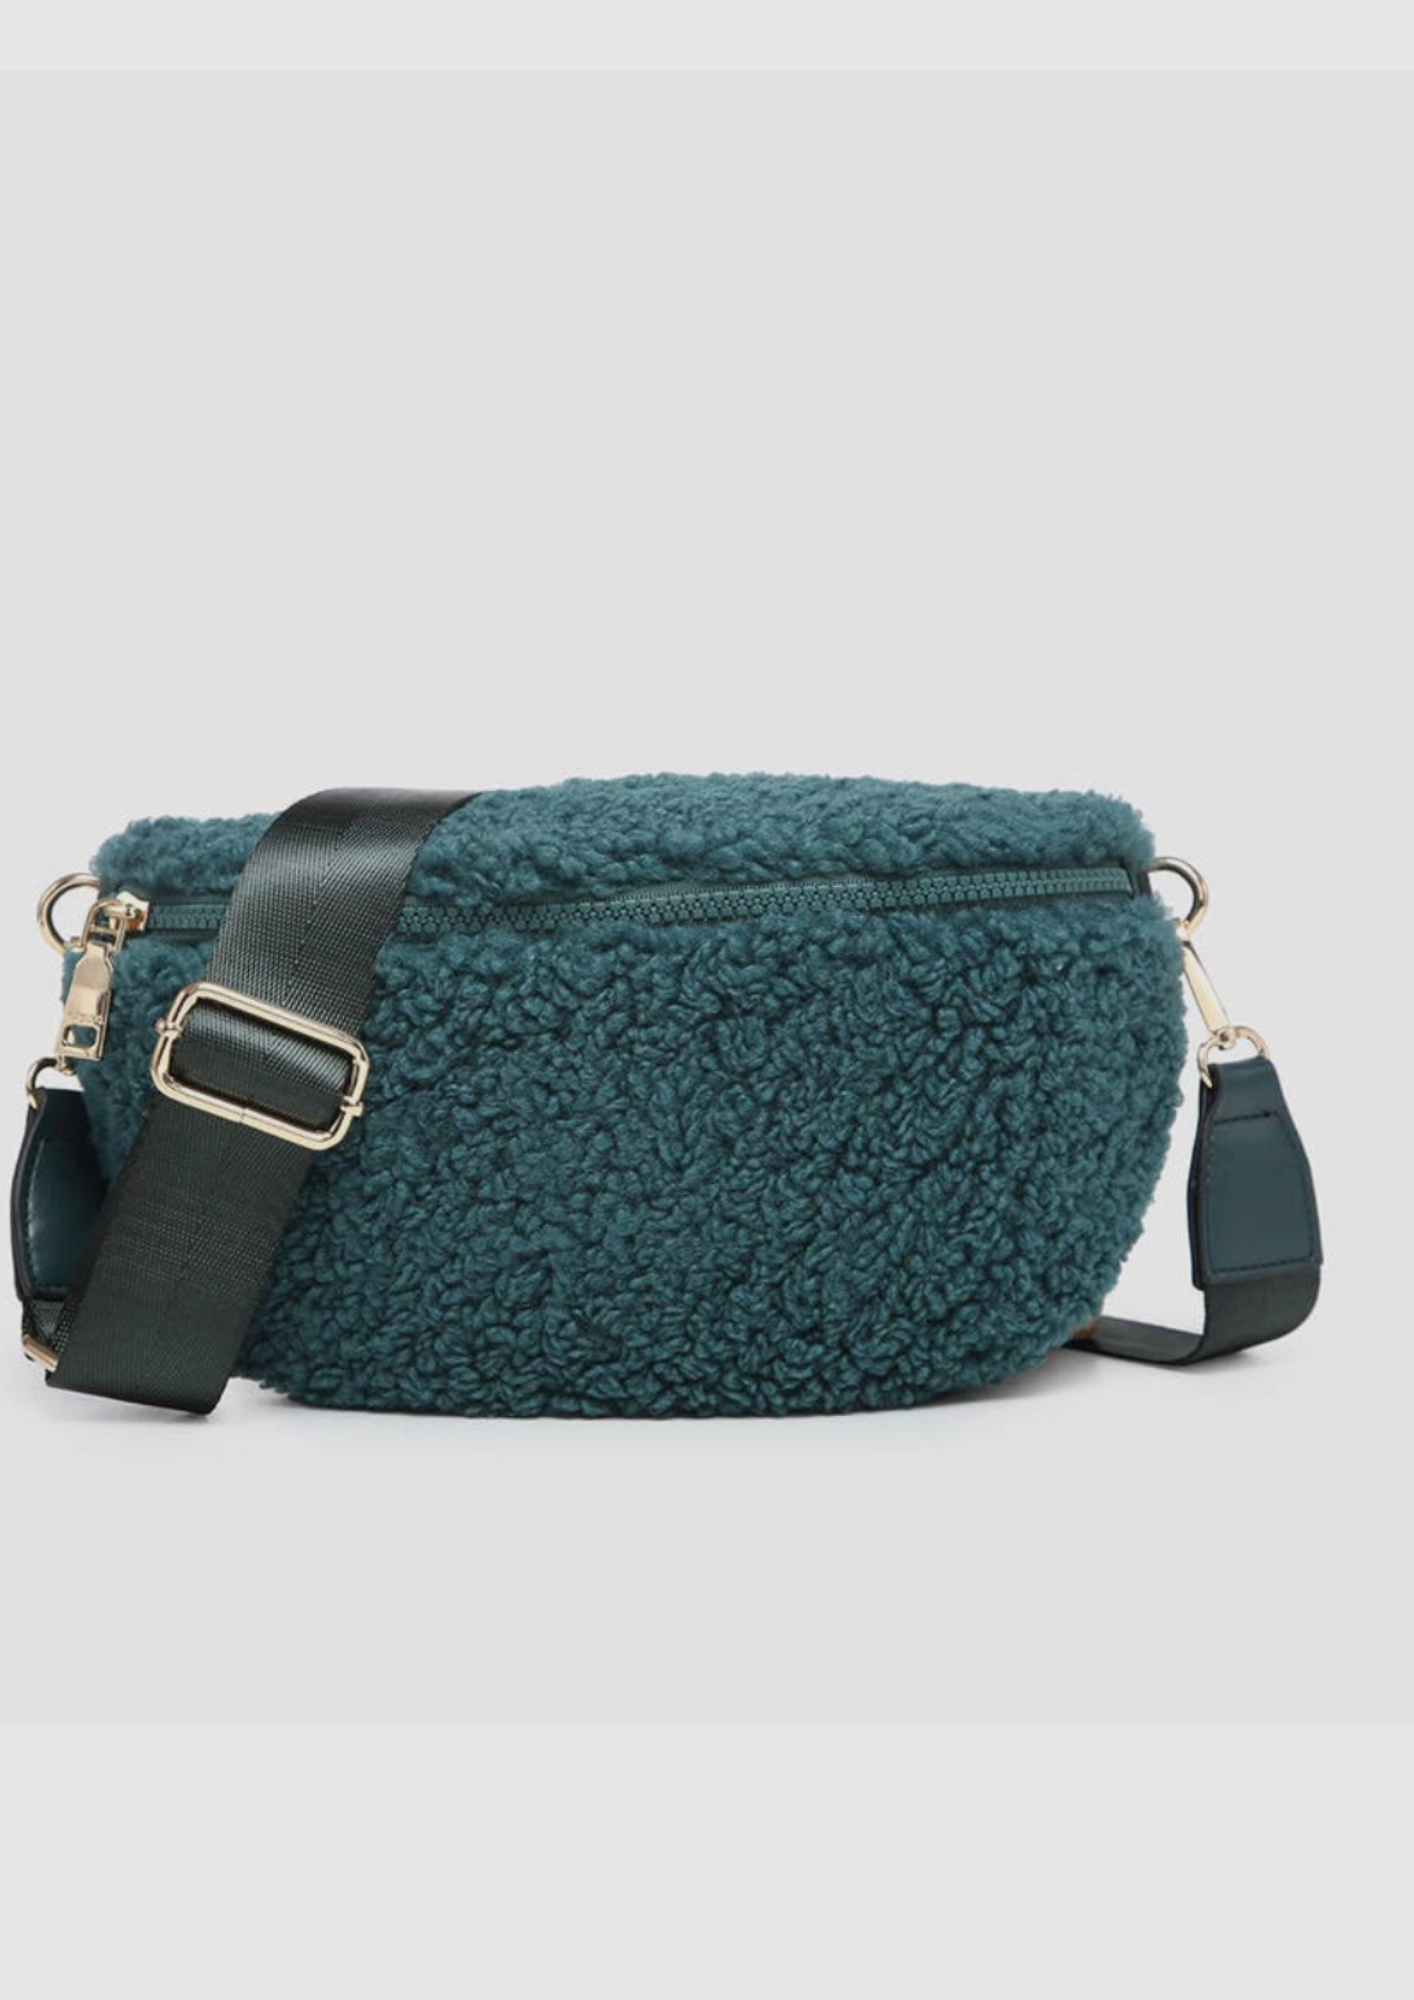 Sherpa belt bag in a pretty green peacock with adjustable guitar strap, front zip closure, back zip pocket, inner zip pocket and card slot. 